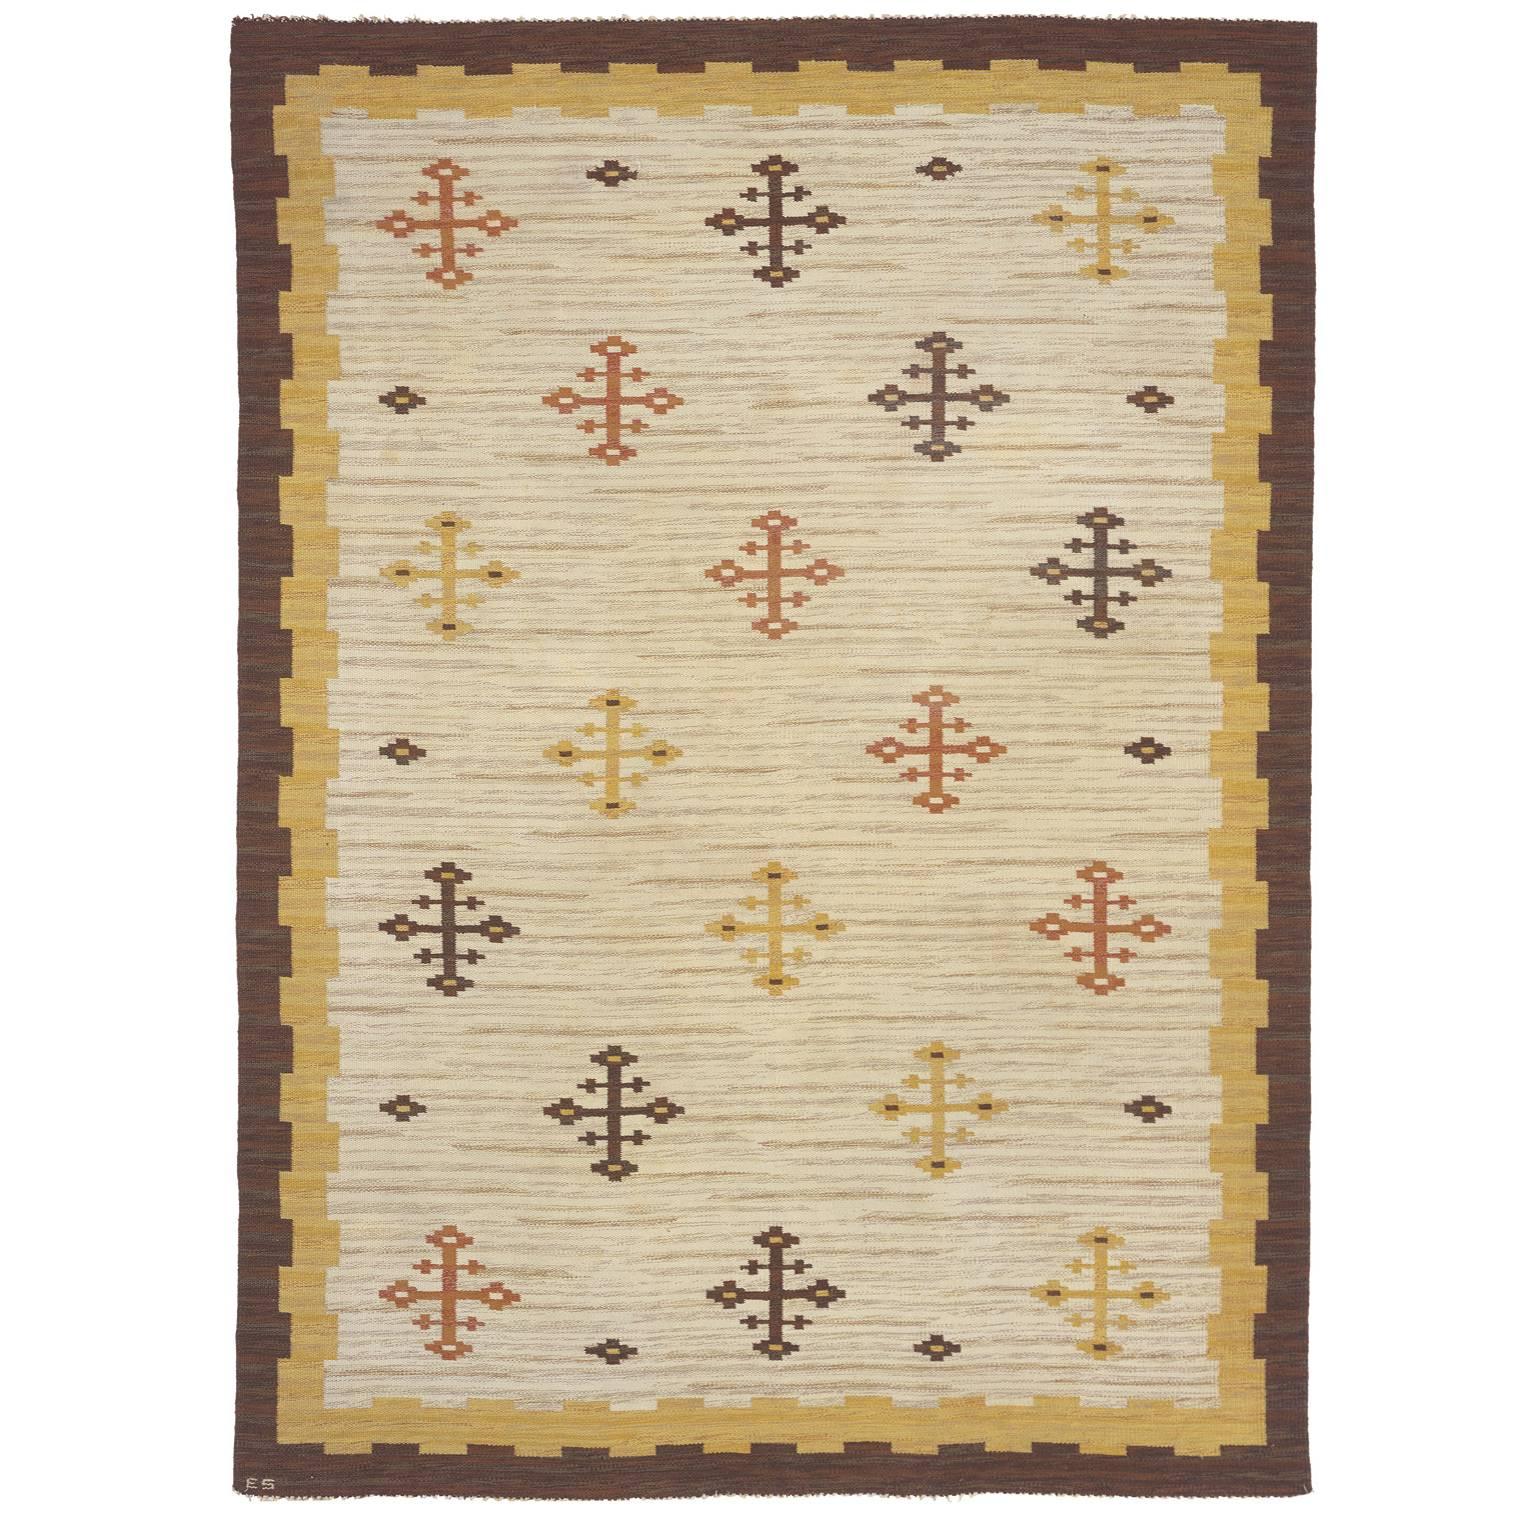 Early-20th Century Swedish Flat-Weave Carpet For Sale